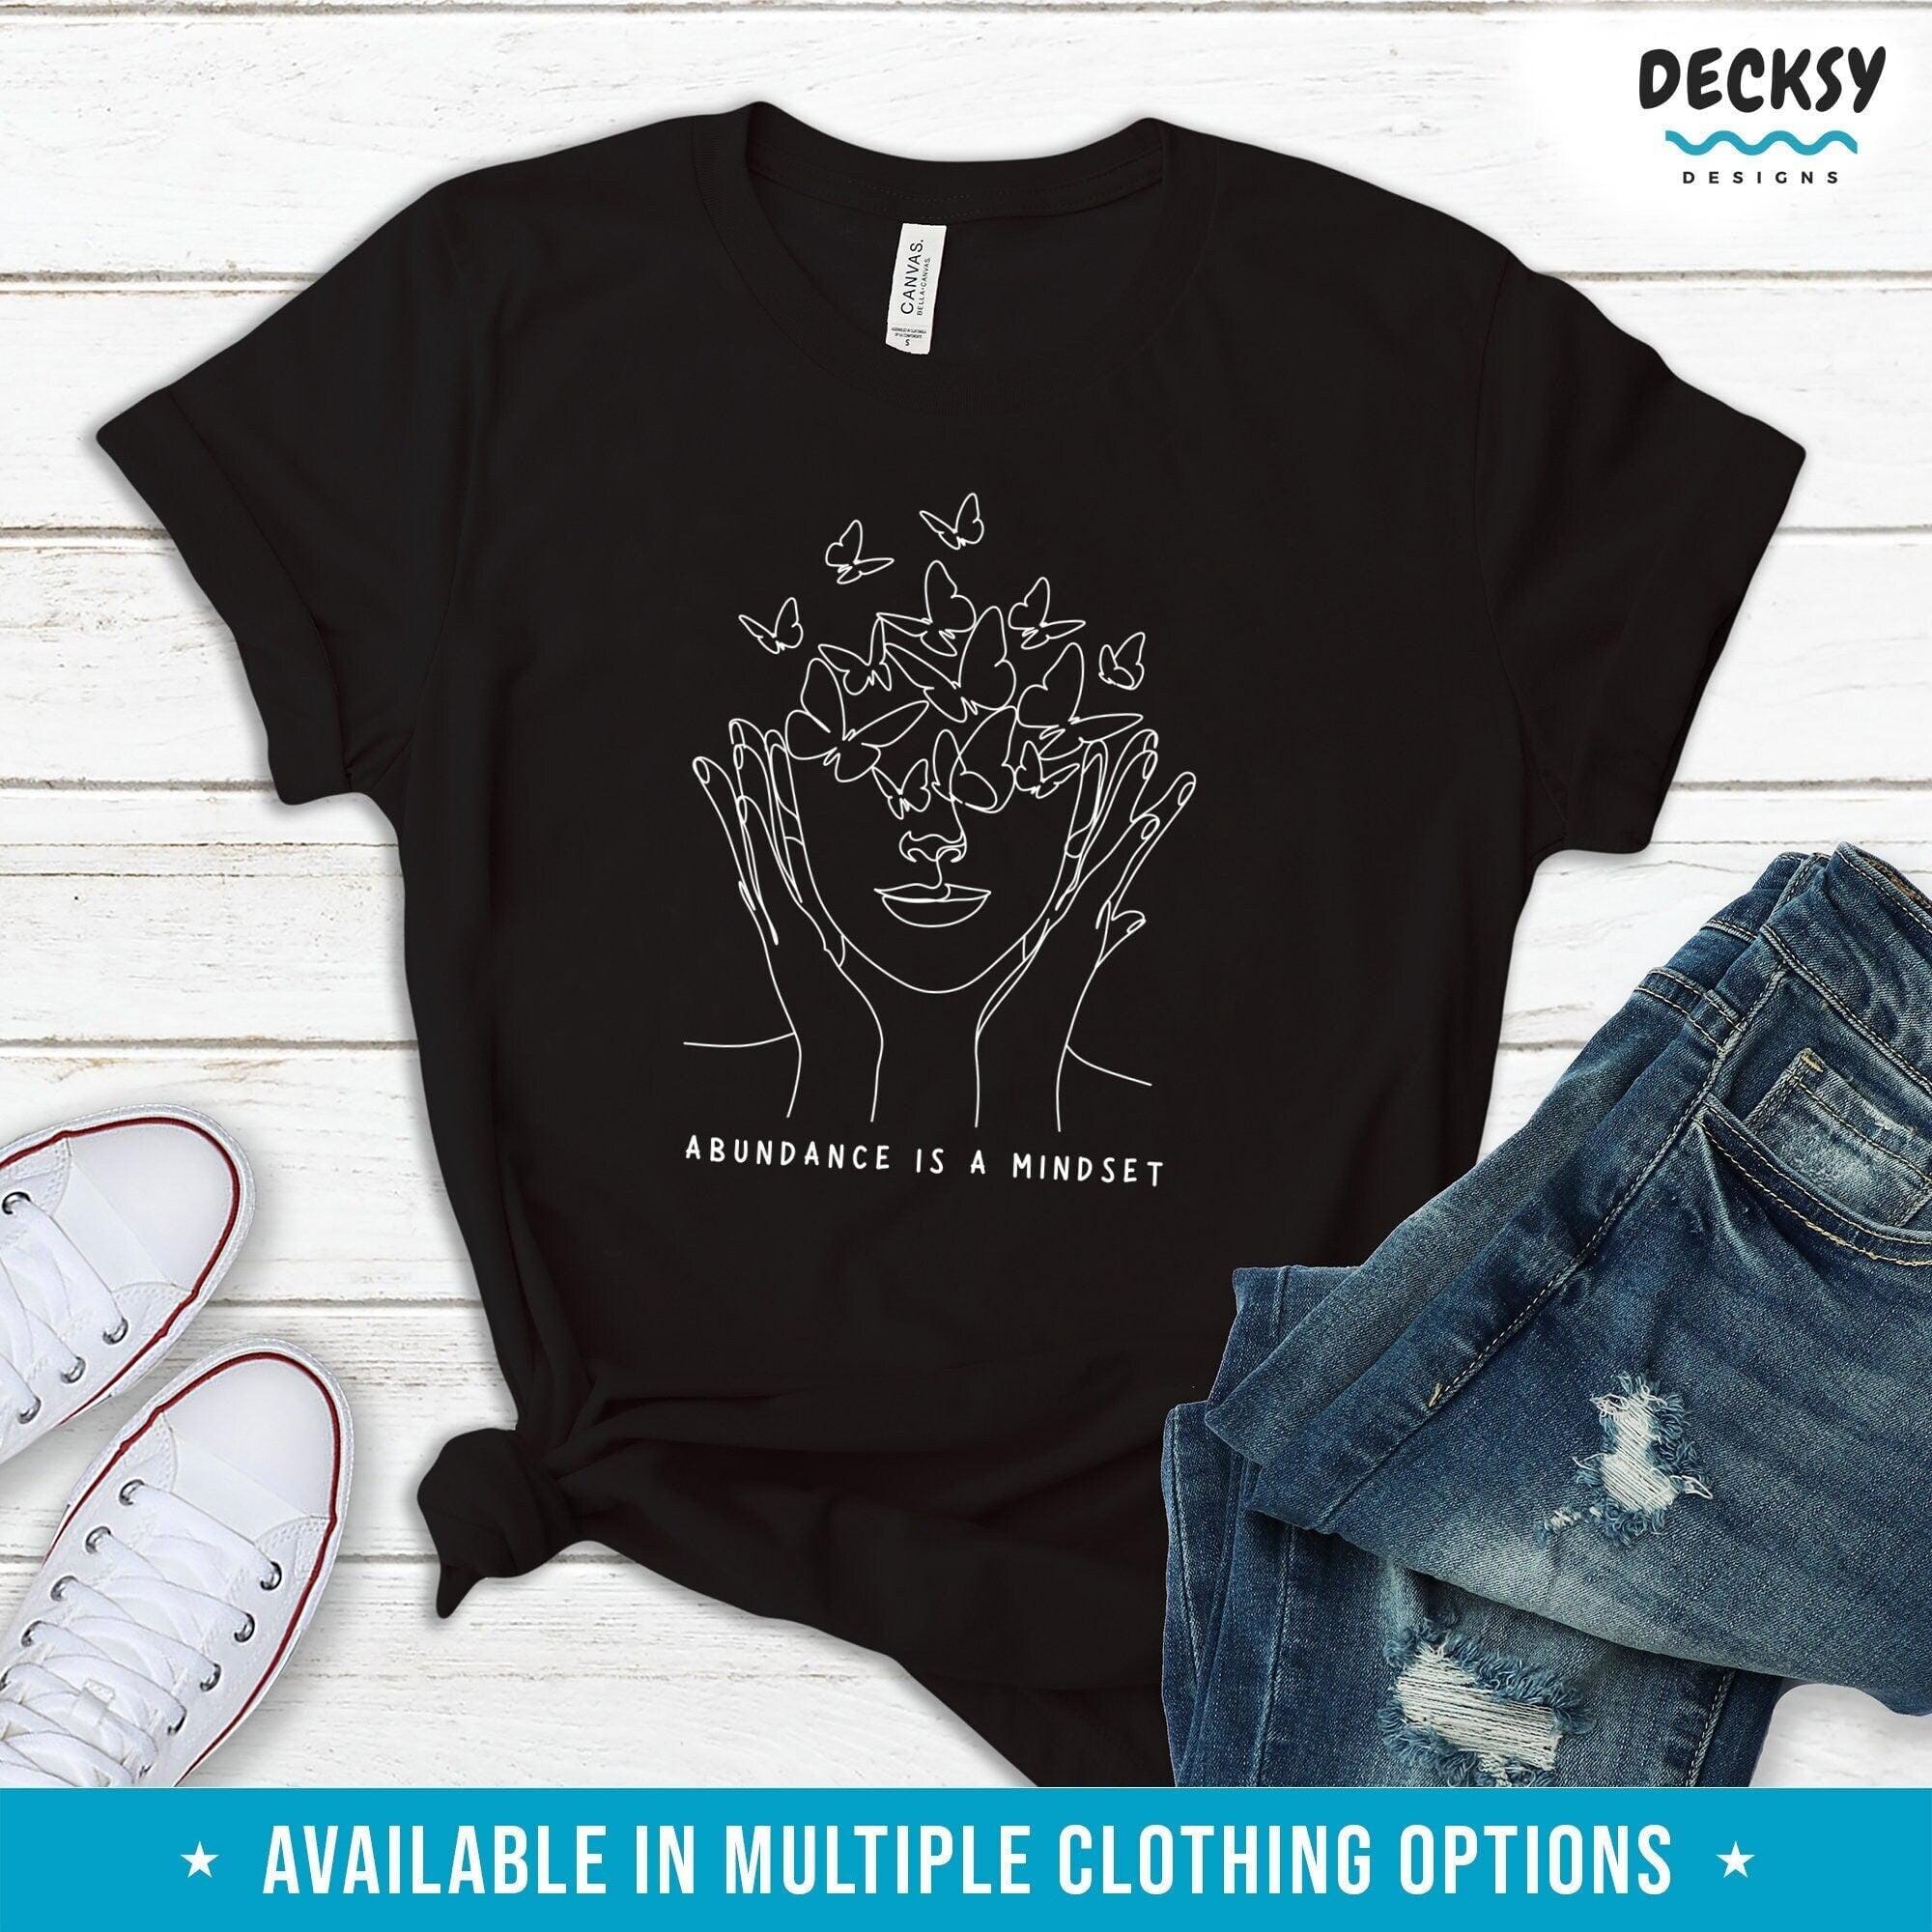 Abundance Mindset Shirt, Butterfly Lover Gift Tee-Clothing:Gender-Neutral Adult Clothing:Tops & Tees:T-shirts:Graphic Tees-DecksyDesigns